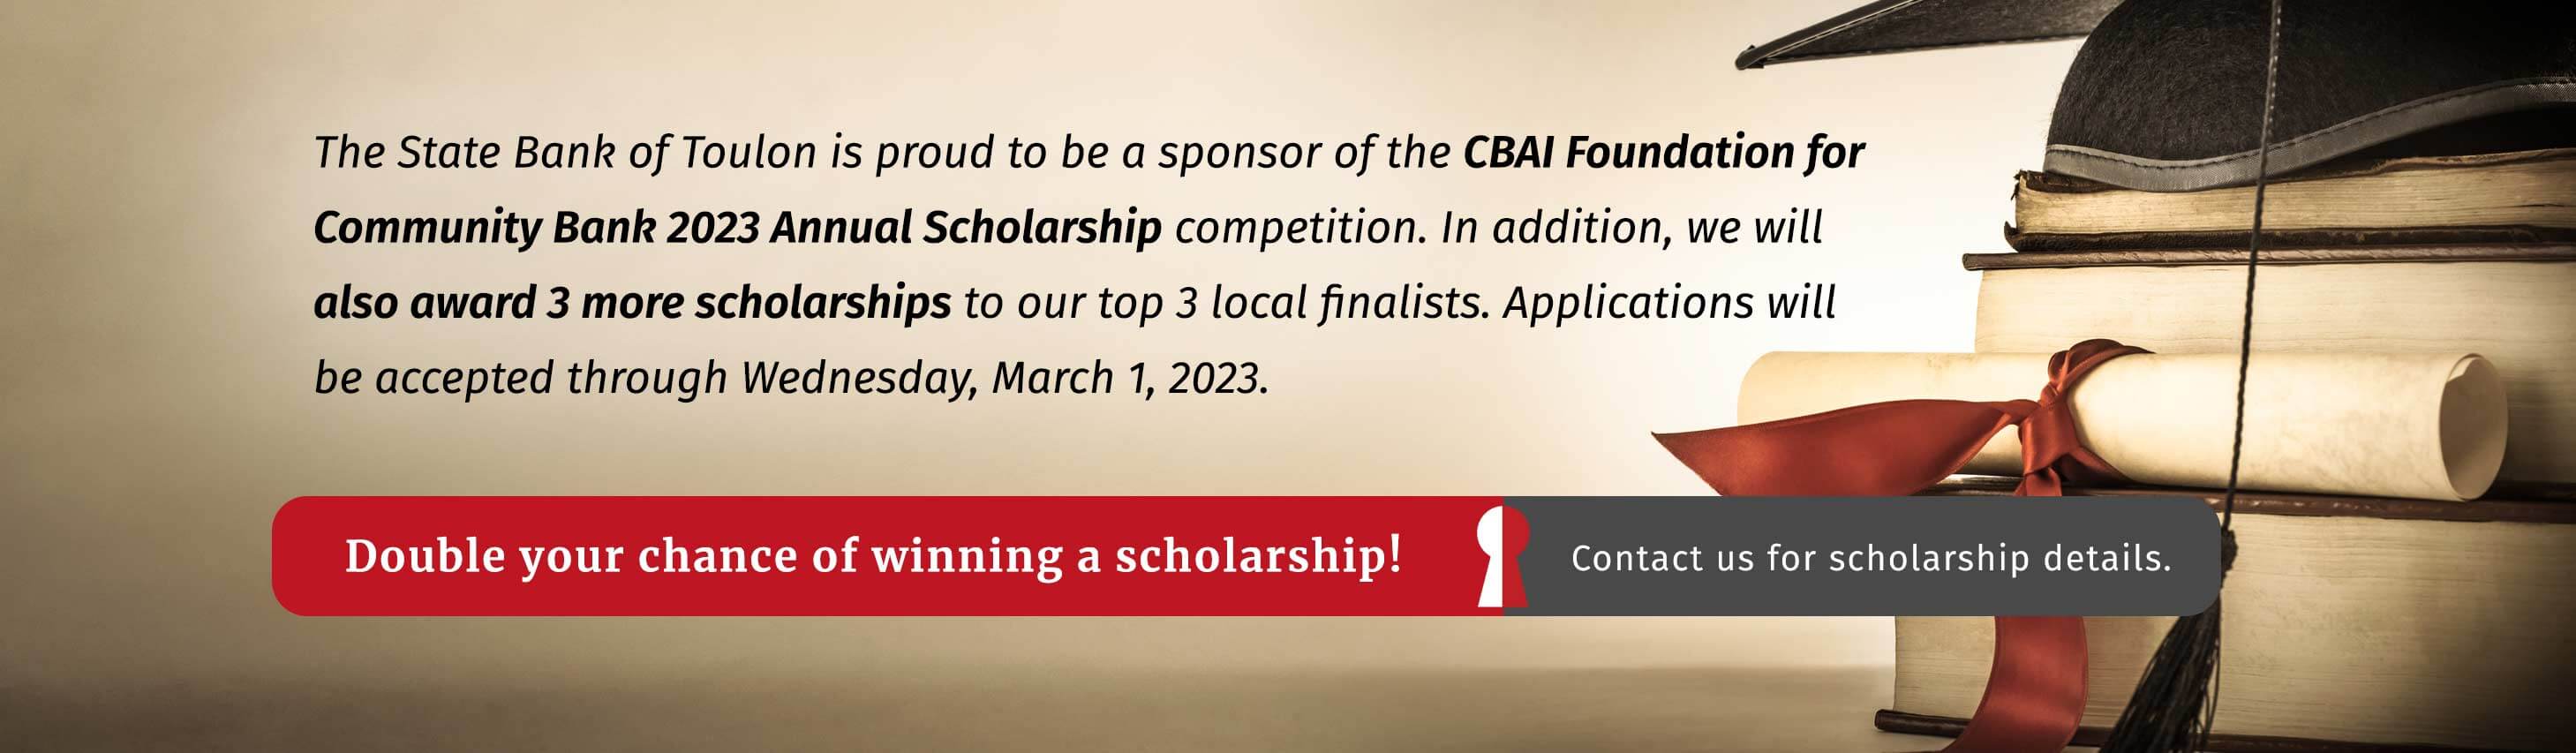 The State Bank of Toulon is proud to be a sponsor of the CBAI Foundation for Community Bank 2023 Annual Scholarship competition. In addition, we will also award 3 more scholarships to our top 3 local finalists. Applications will be accepted through Wednesday, March 1, 2023. Double your chance of winning a scholarship! Contact us for scholarship details.